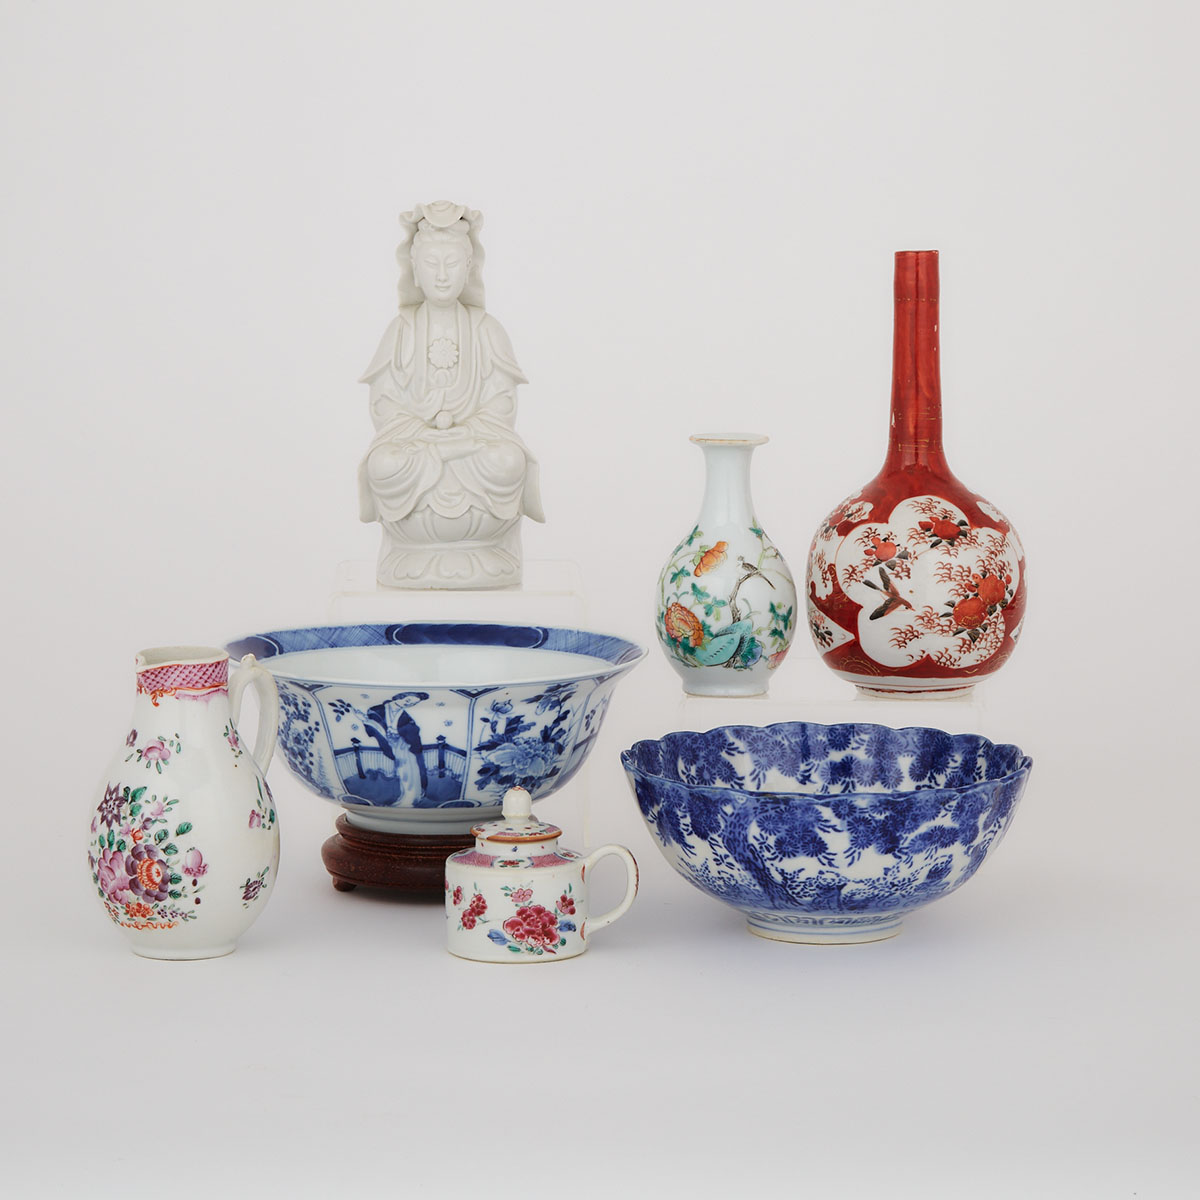 A Group of Seven Porcelain Items, 18th Century and Later